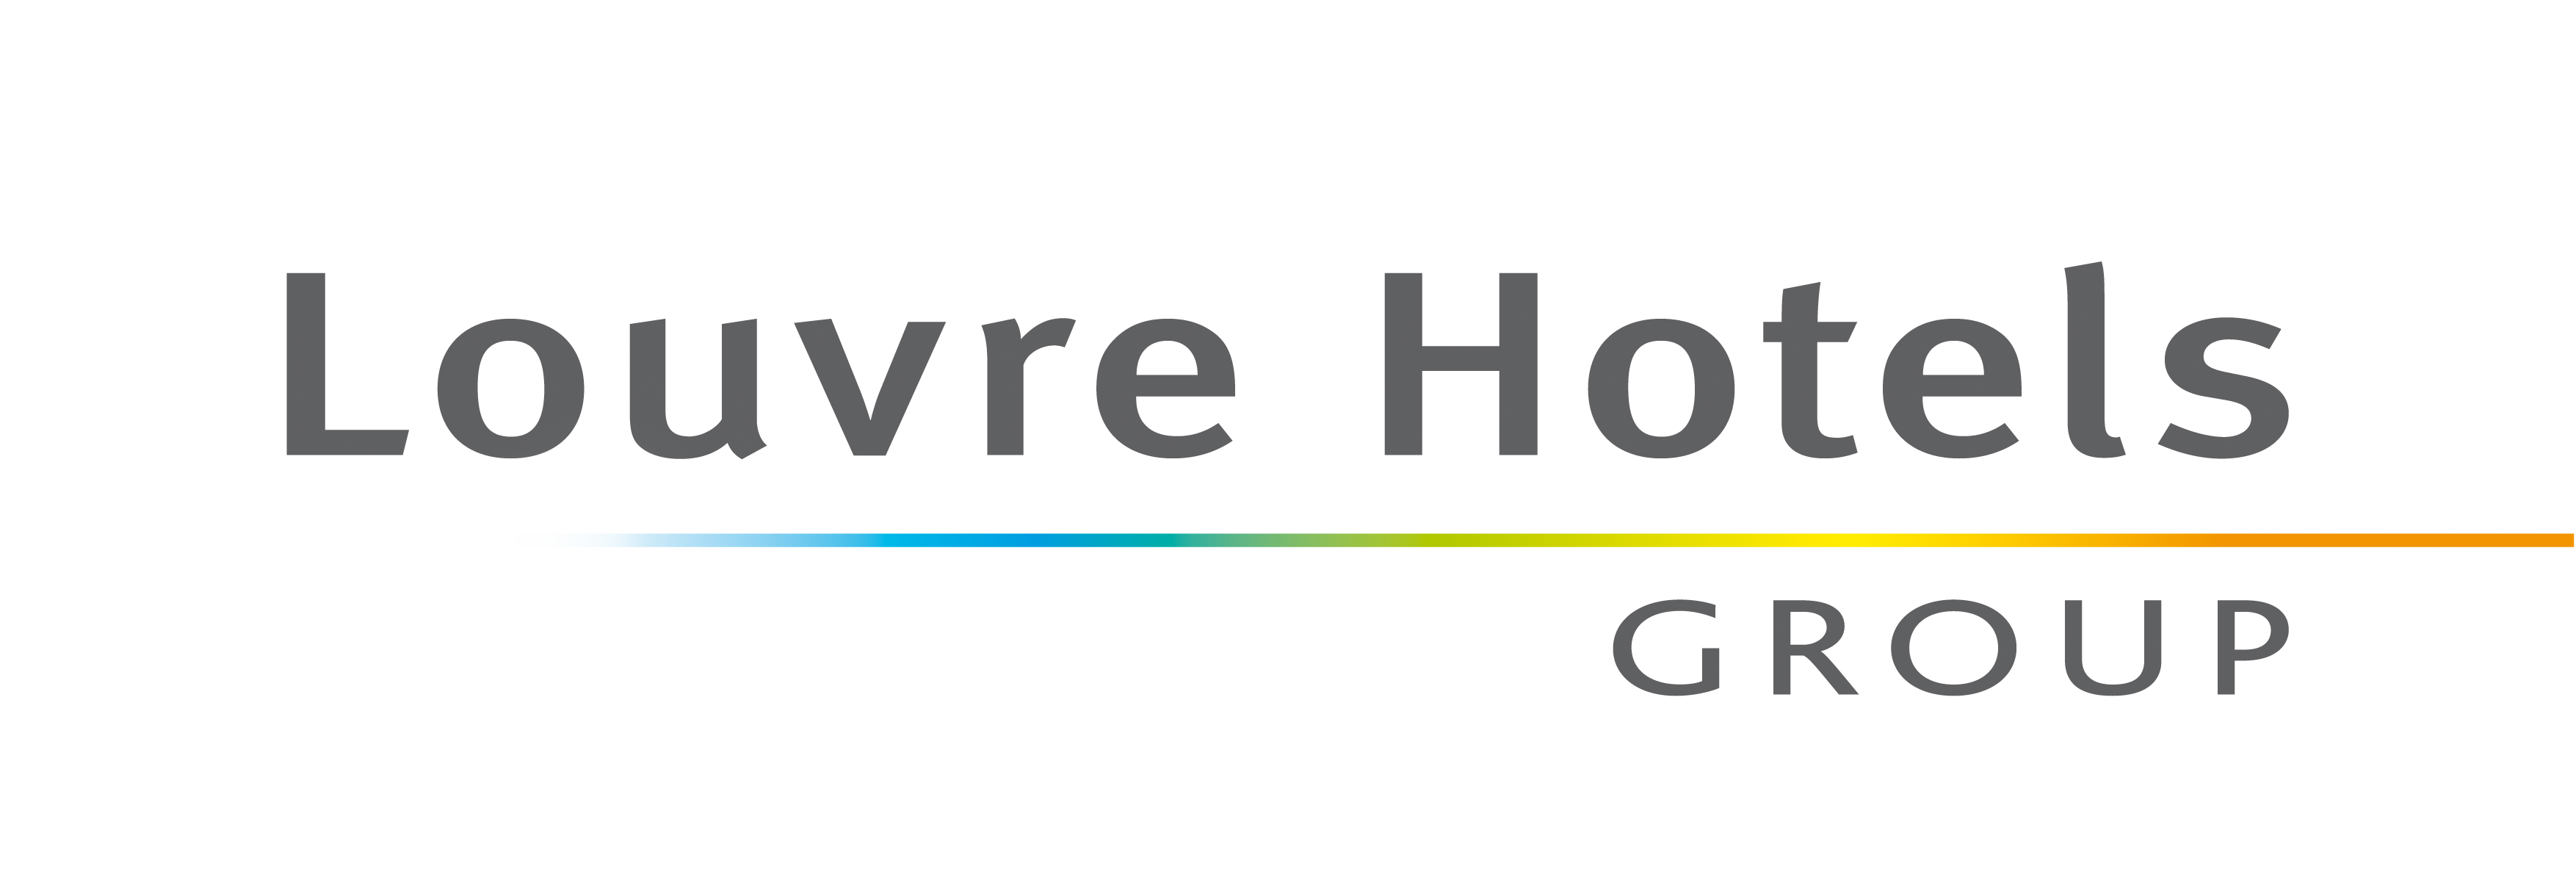 logo-louvre-hotels-group_0